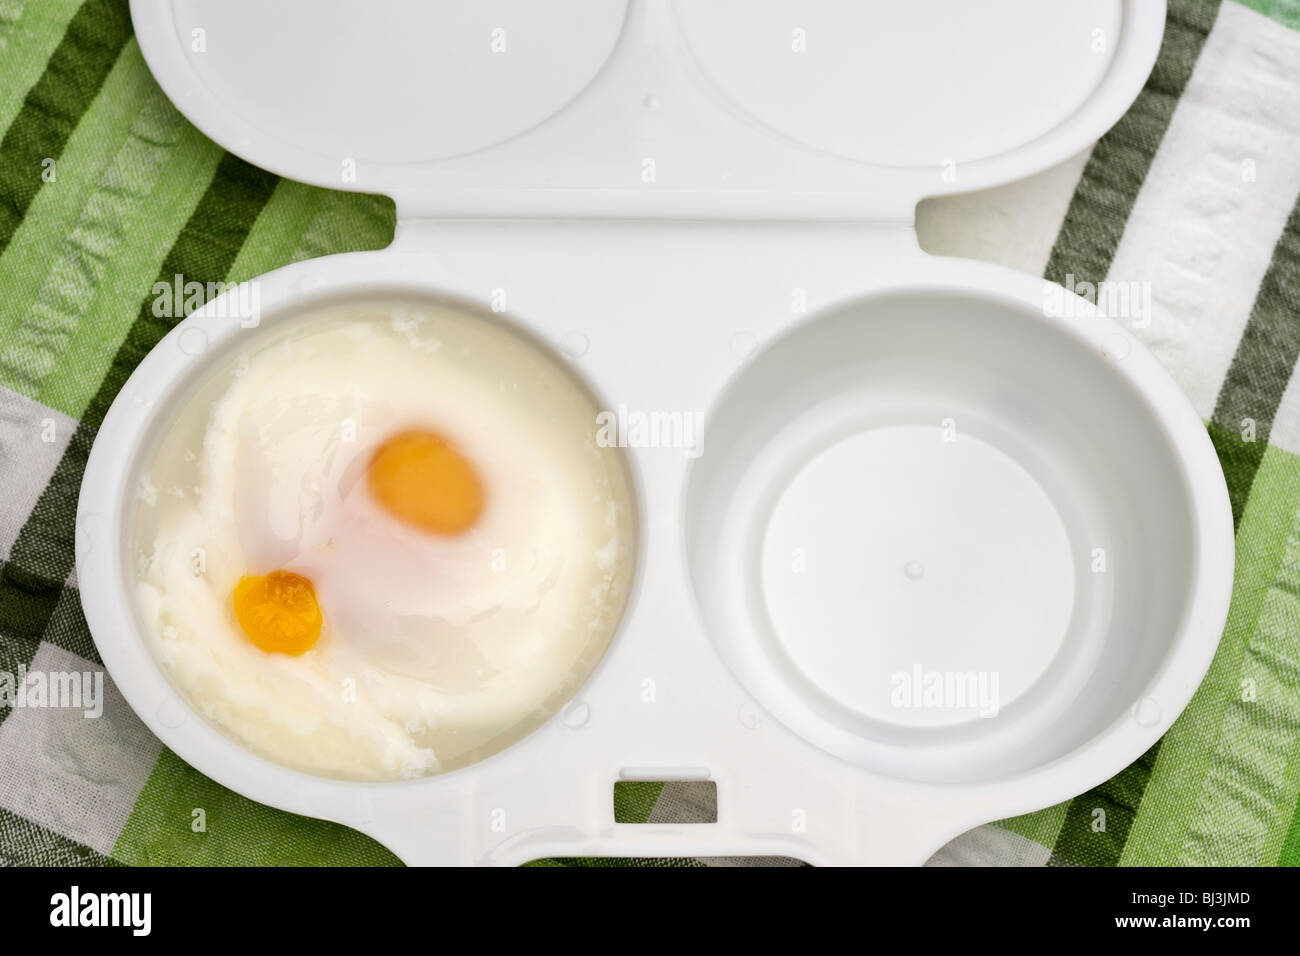 microwave two egg cooker with two cooked eggs Stock Photo - Alamy